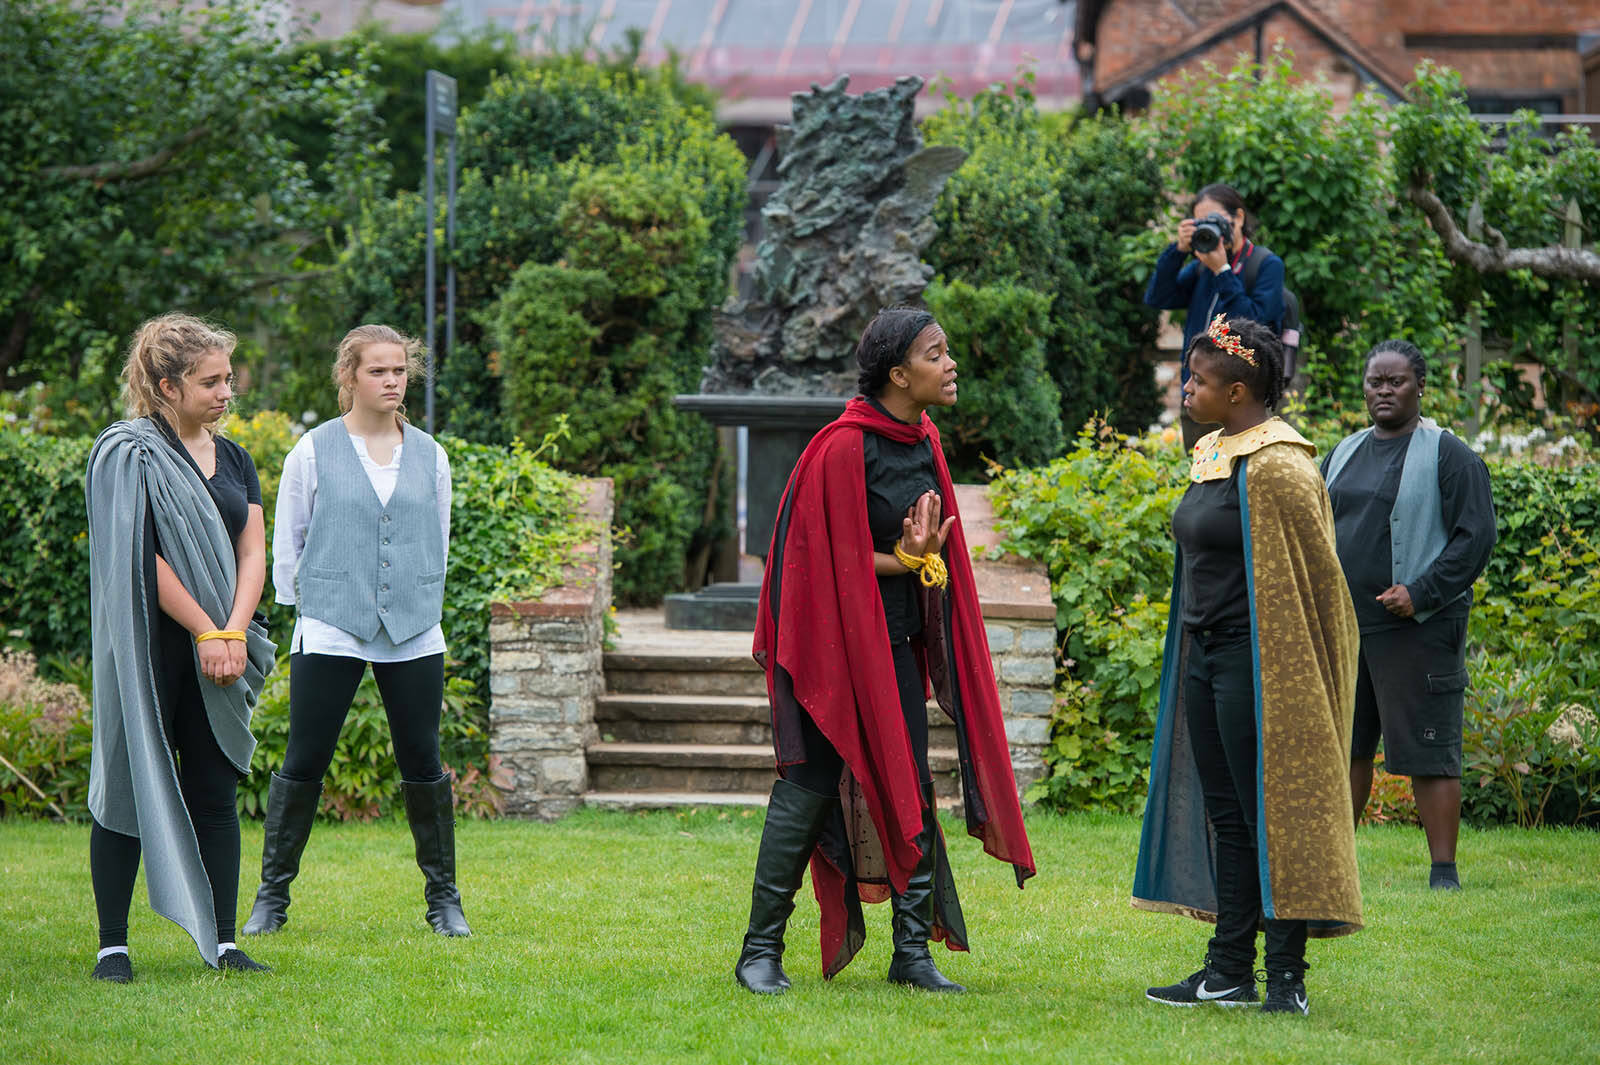 Robinson Shakespeare Company members rehearse at Shakespeare's New Place in Stratford-upon-Avon, Warwickshire, England.